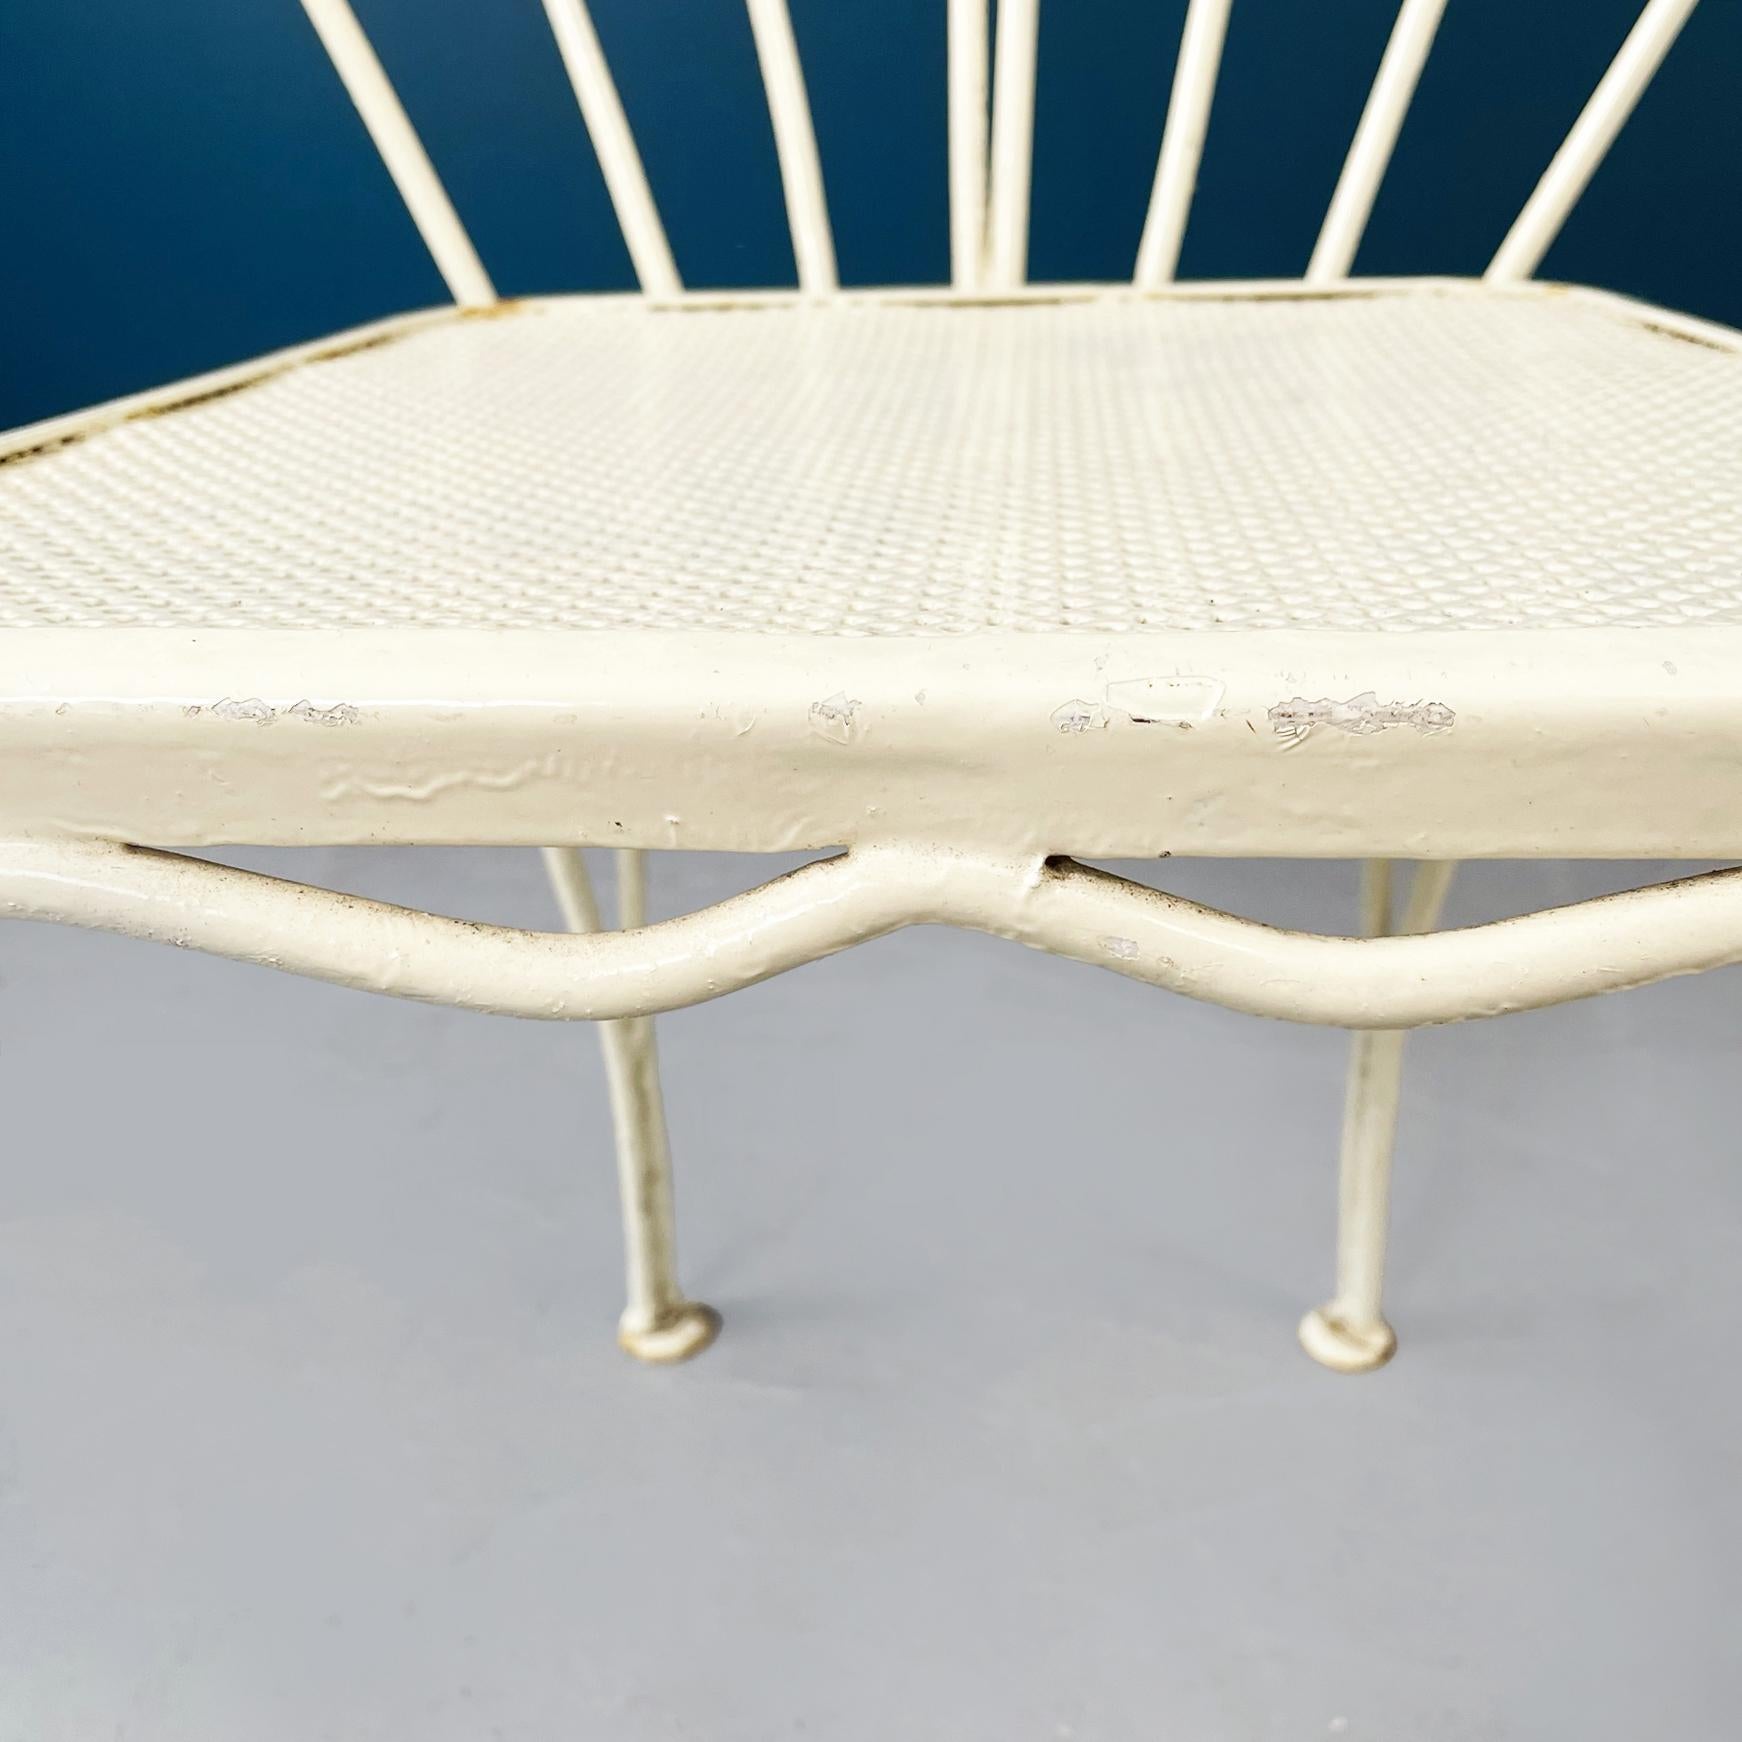 Italian Mid-Century Modern Garden Chairs in White Wrought Iron, 1960s For Sale 3